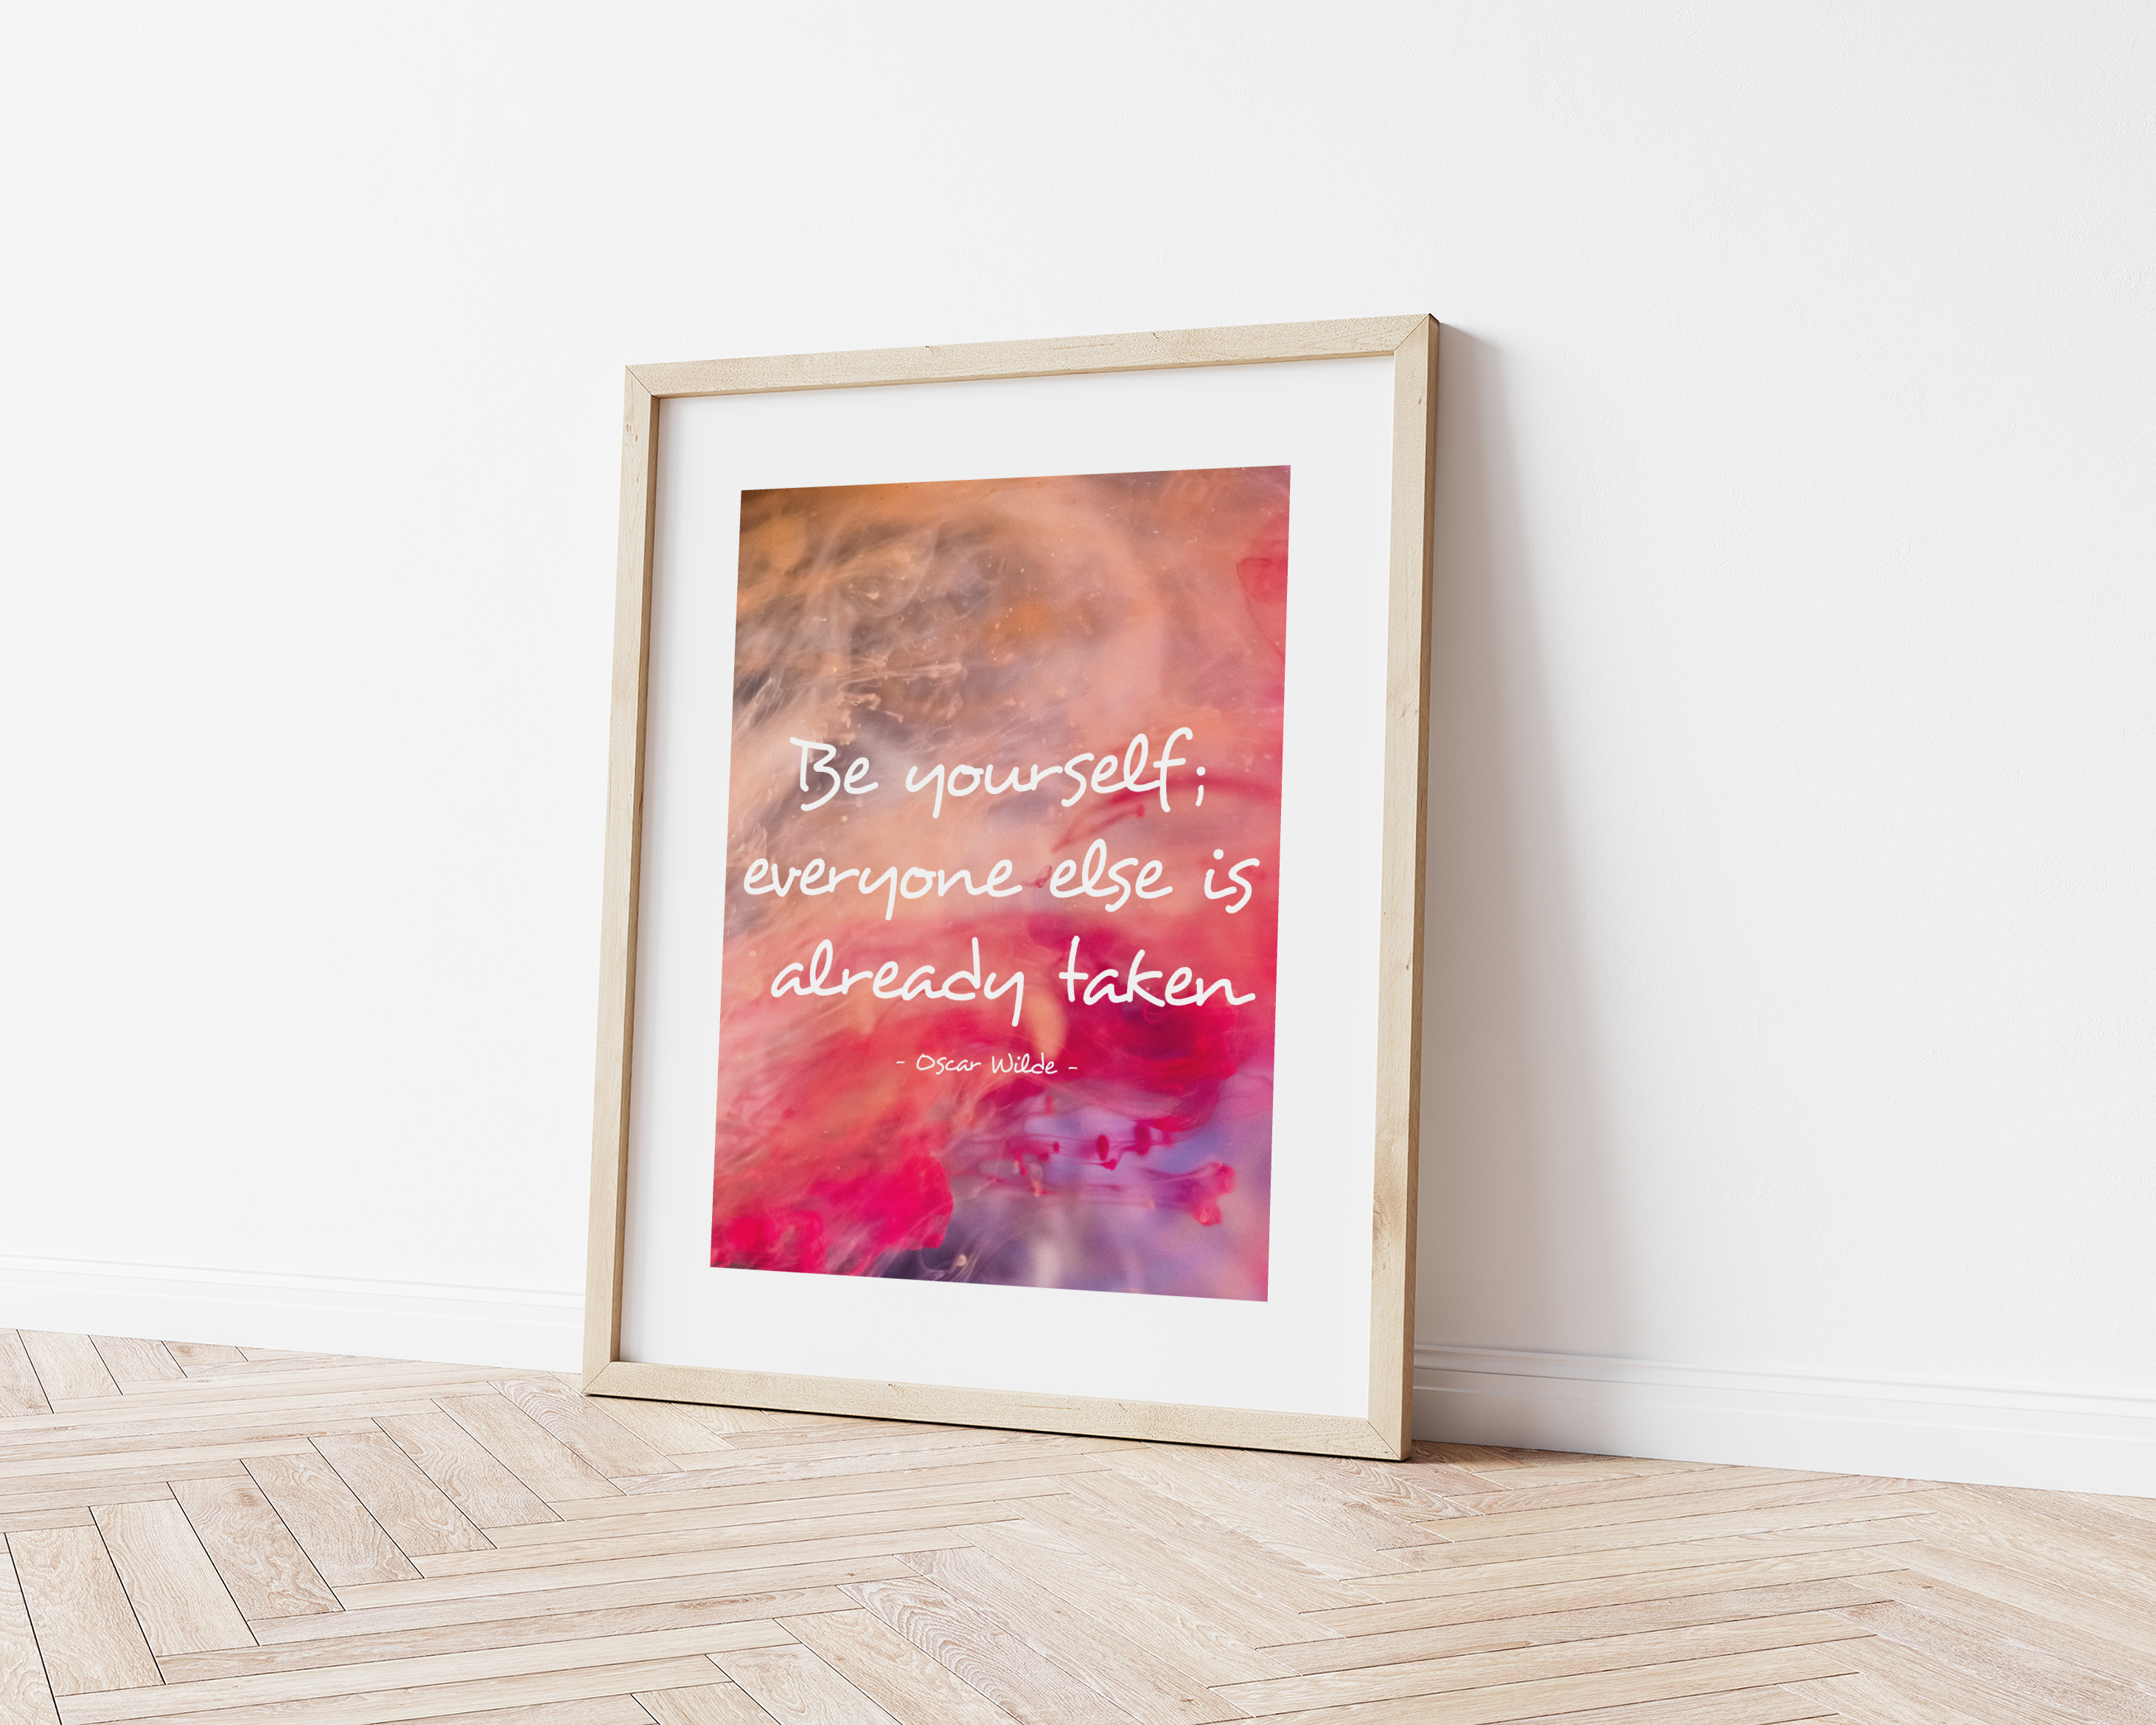 oscar wilde print with quote ''be yourself; everyone else is already taken